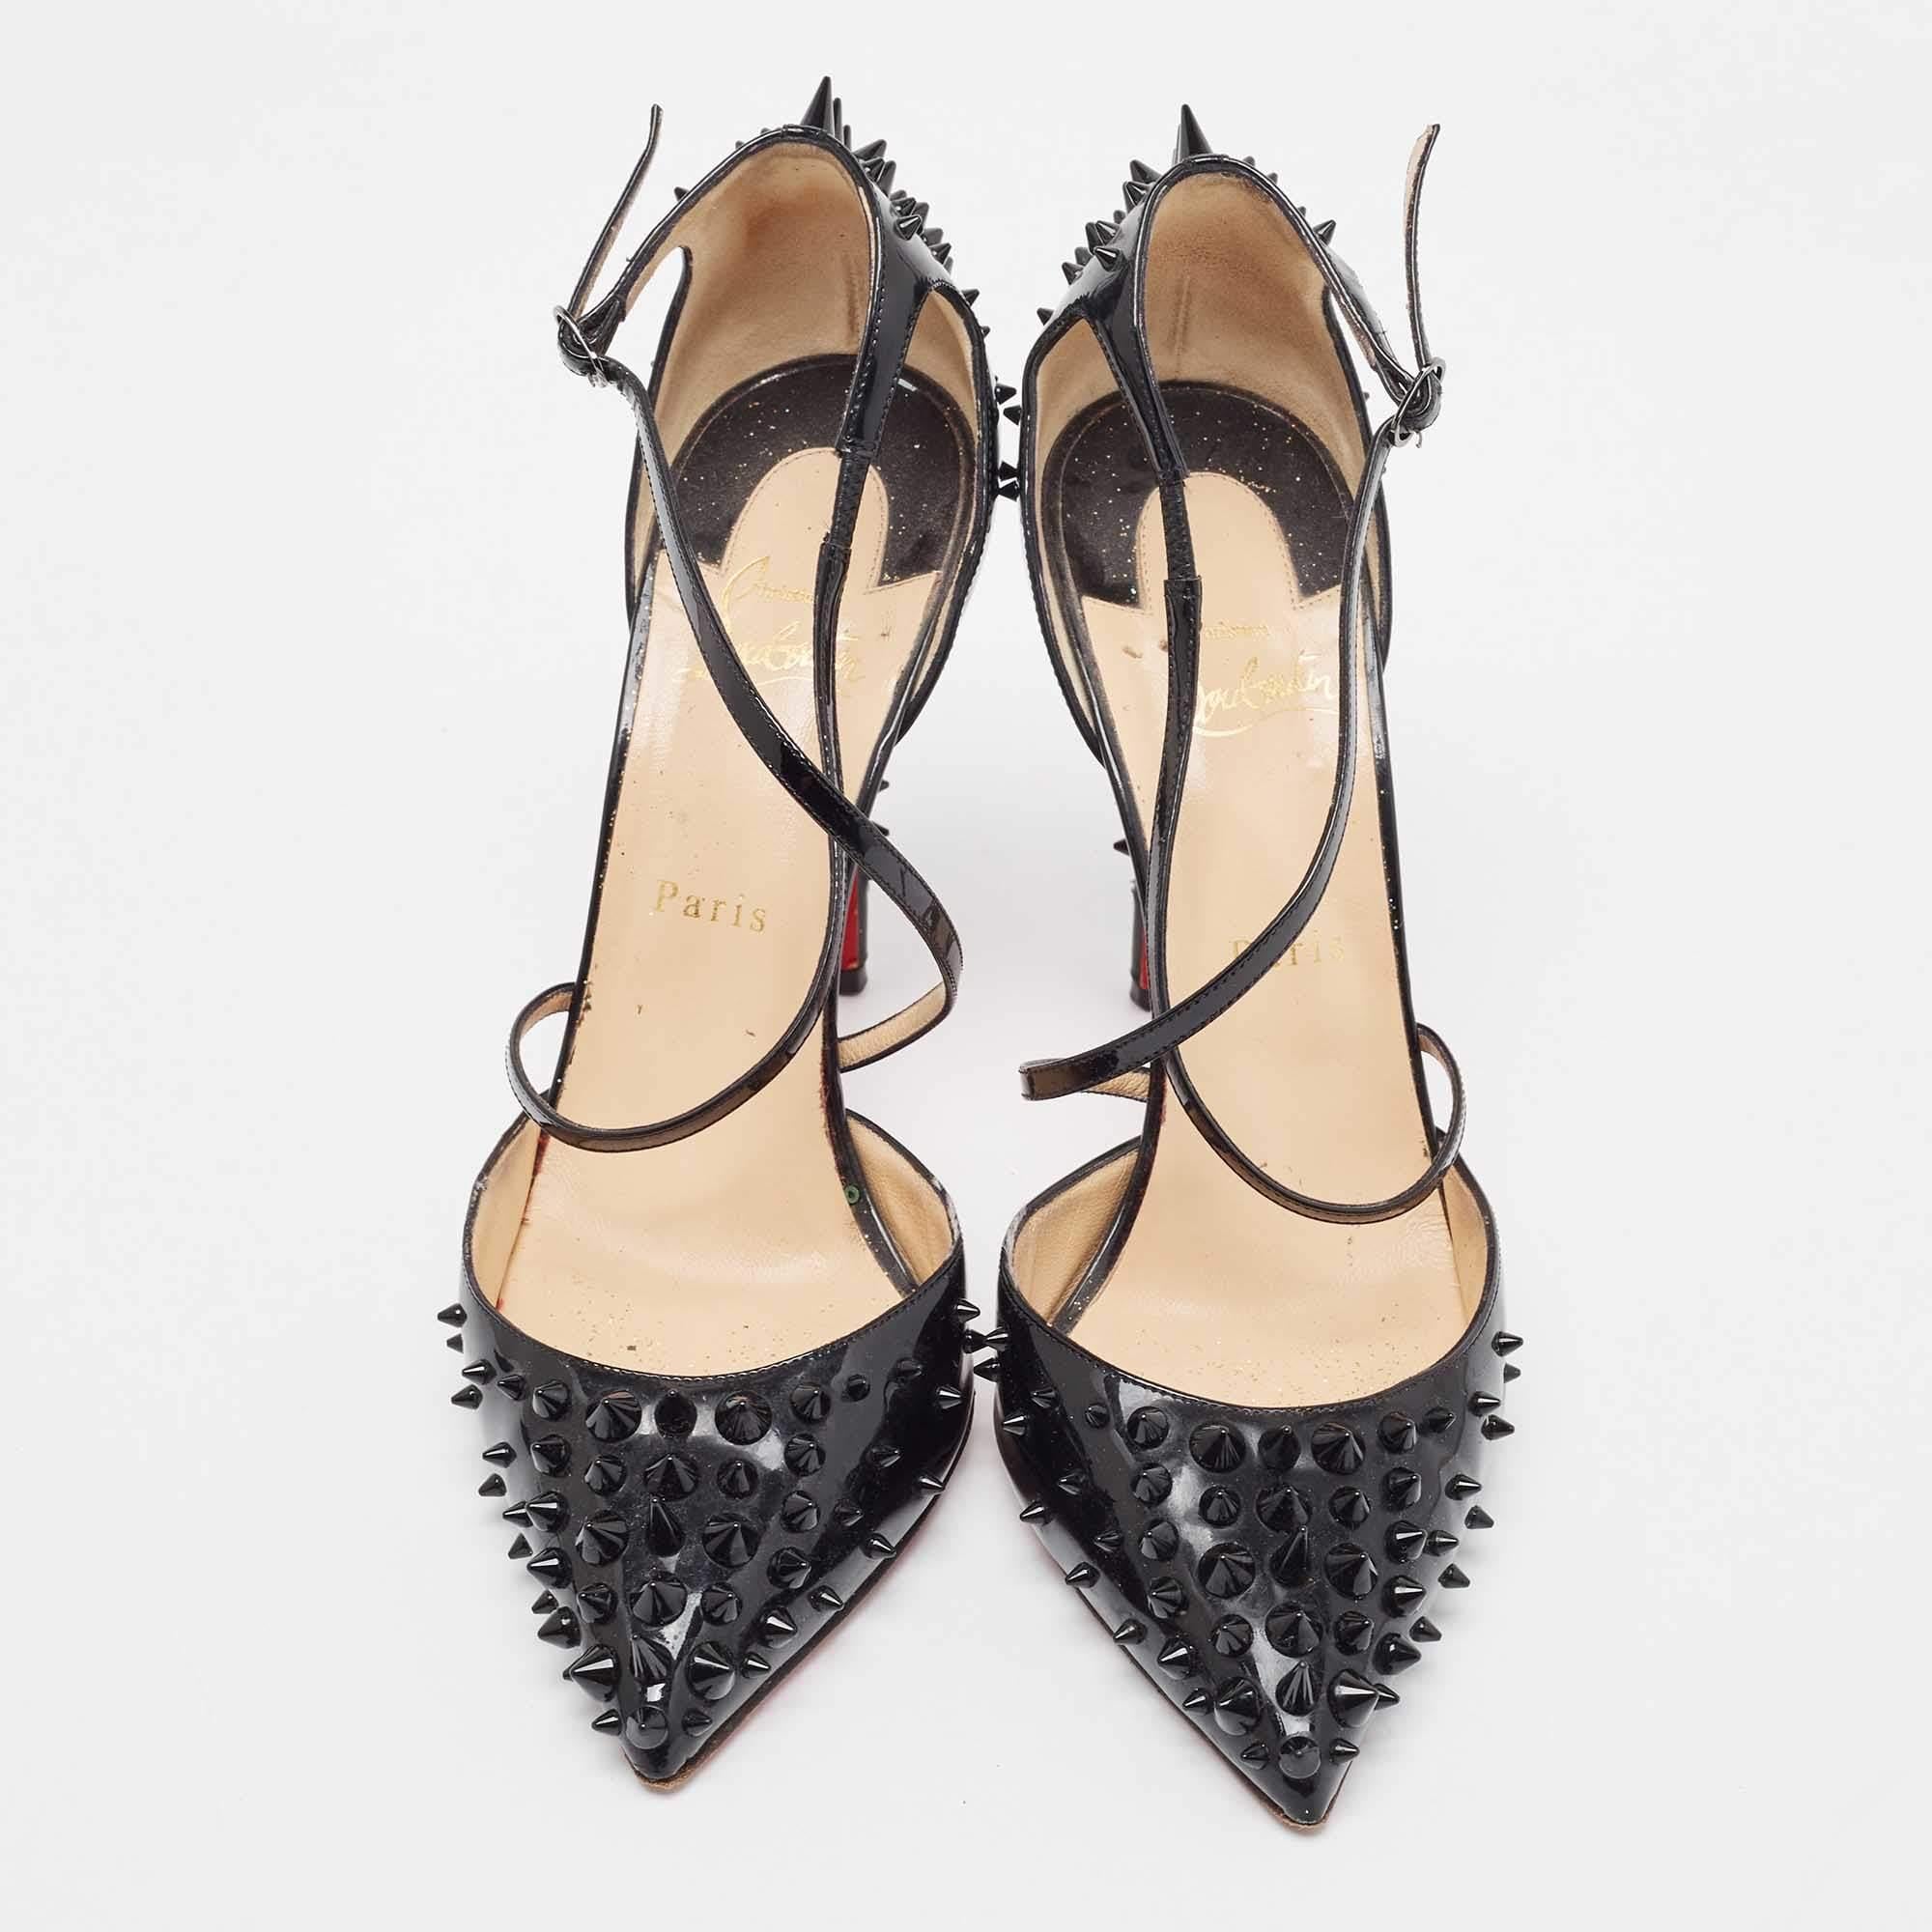 Rock these Christian Louboutin spike pumps at the next party! They have been crafted from patent leather into a criss-cross, ankle strap design and come with comfortable insoles. Gorgeously studded with unique spikes, you can team these bold 11.5 cm